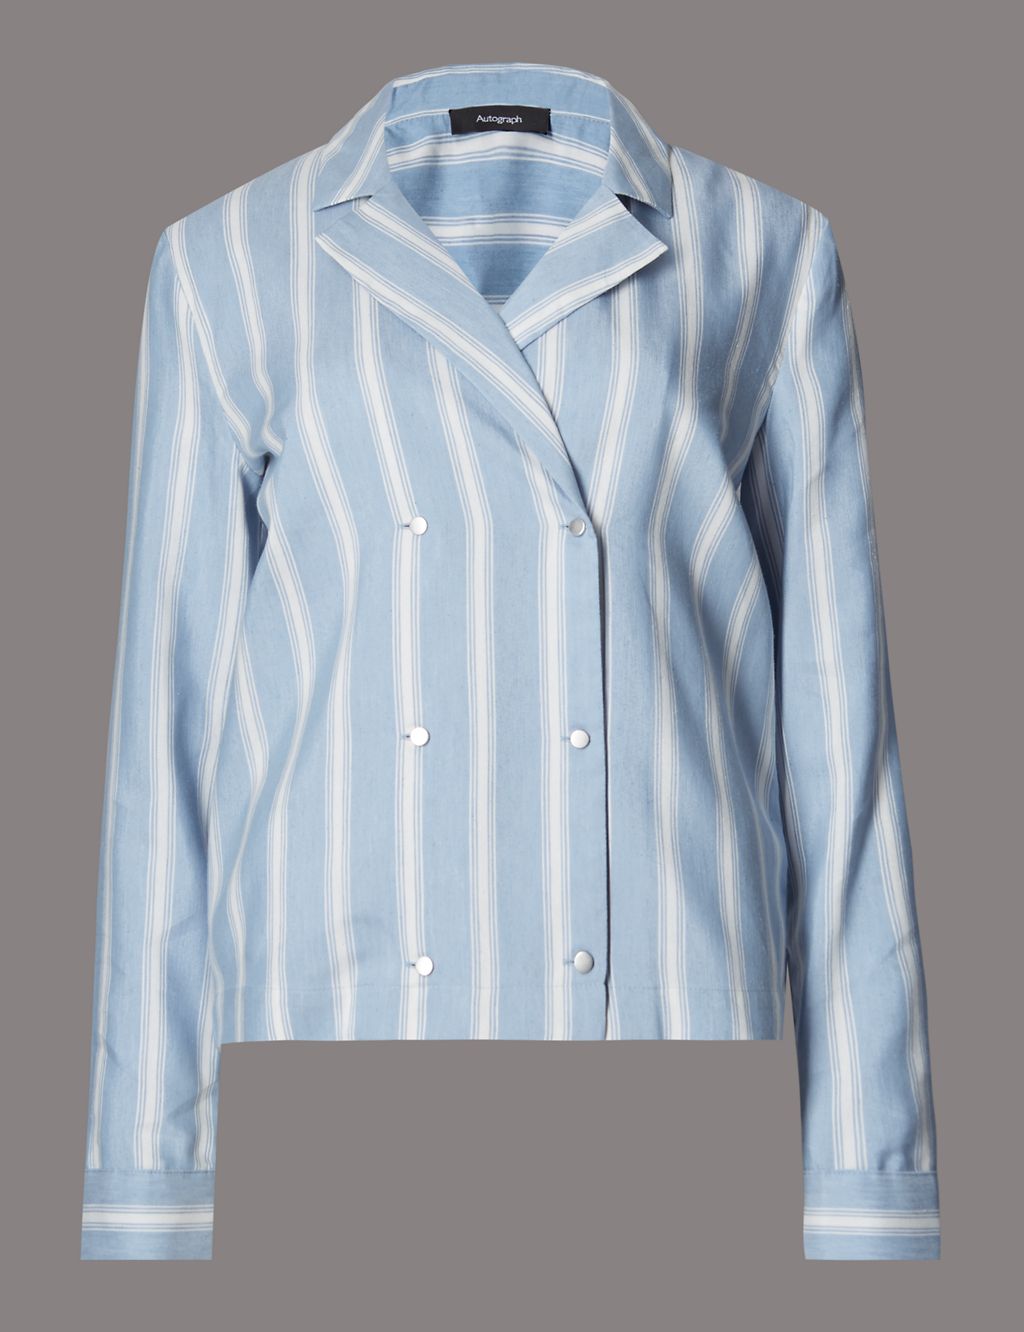 Wide Striped Blouse with Linen 1 of 4